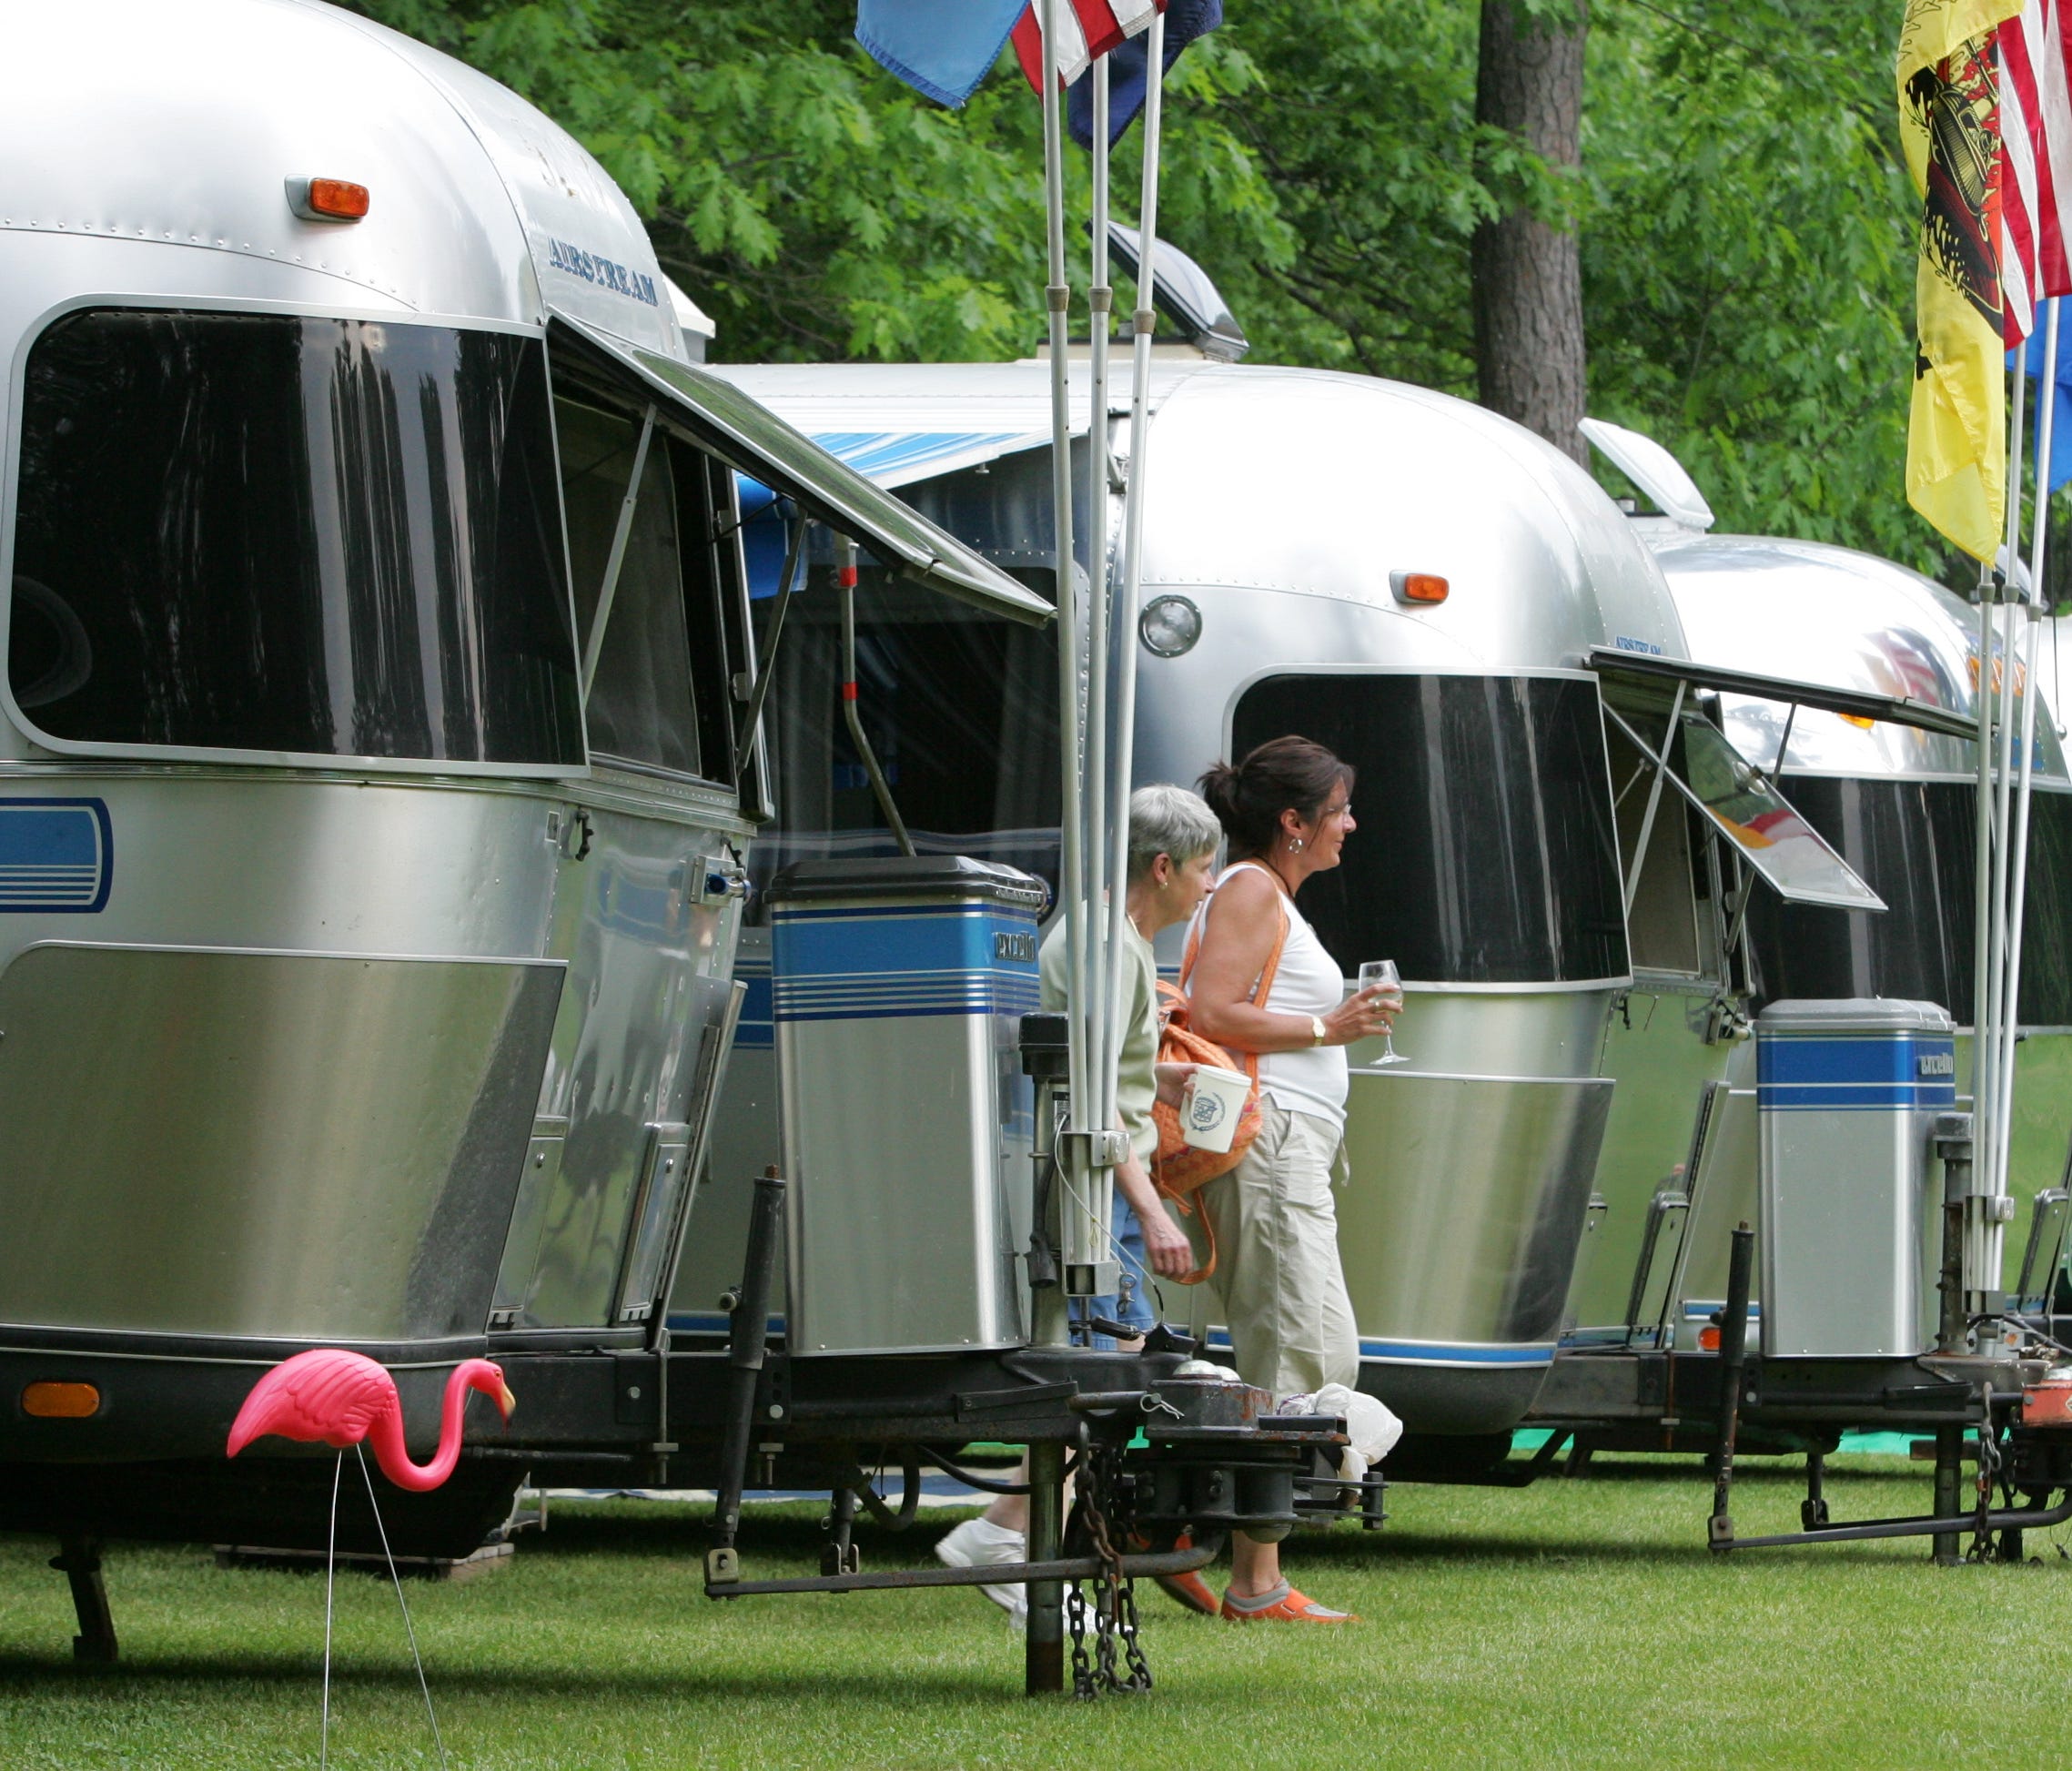 6/1/07 6:17:52 PM -- East Wakefield, NH, U.S.A Airstream Rally Betty Girouard of Winchendon, MA and Elaine Duesel of Marlborough, MA (in white shirt) walk around amidst the Airstream travel trailers parked in the campground at the Lake Forest Resort 